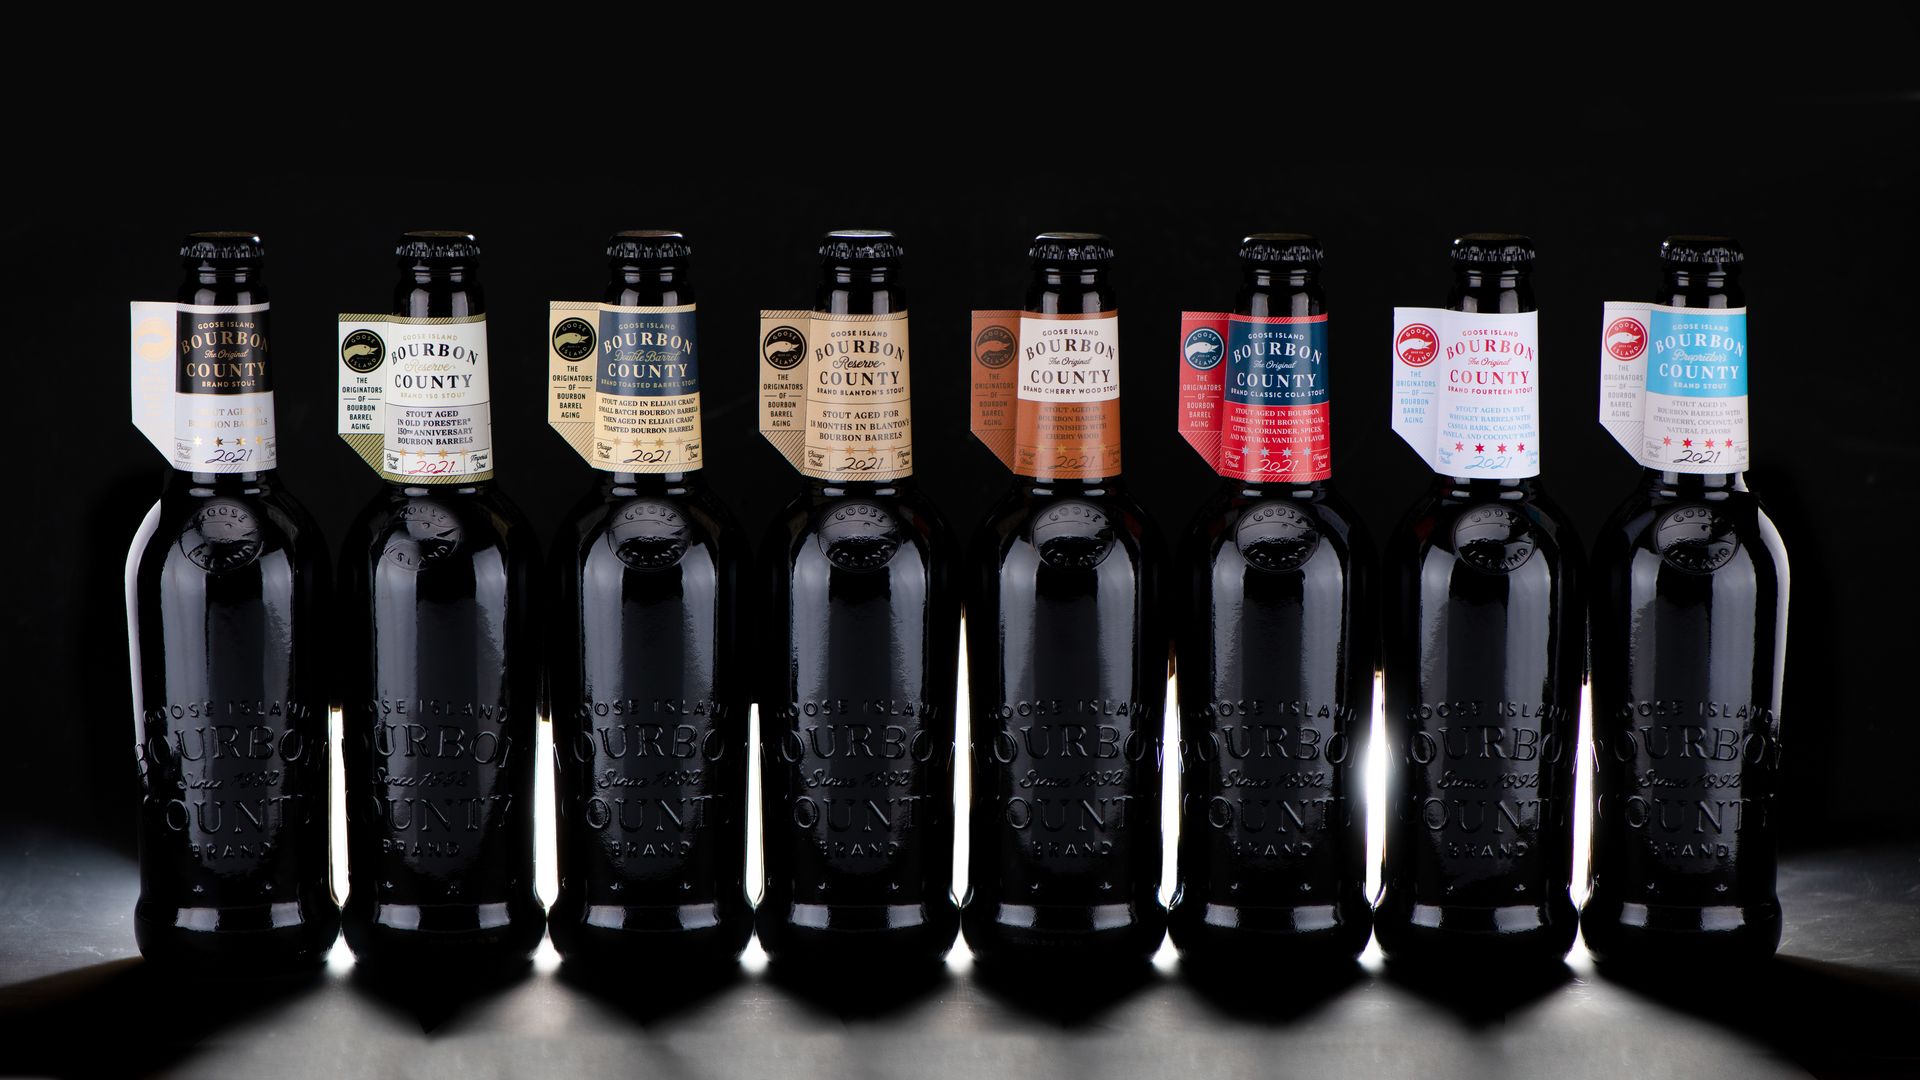 The lineup of 2021 Bourbon County Brand Stout from Goose Island. Photo courtesy of Goose Island